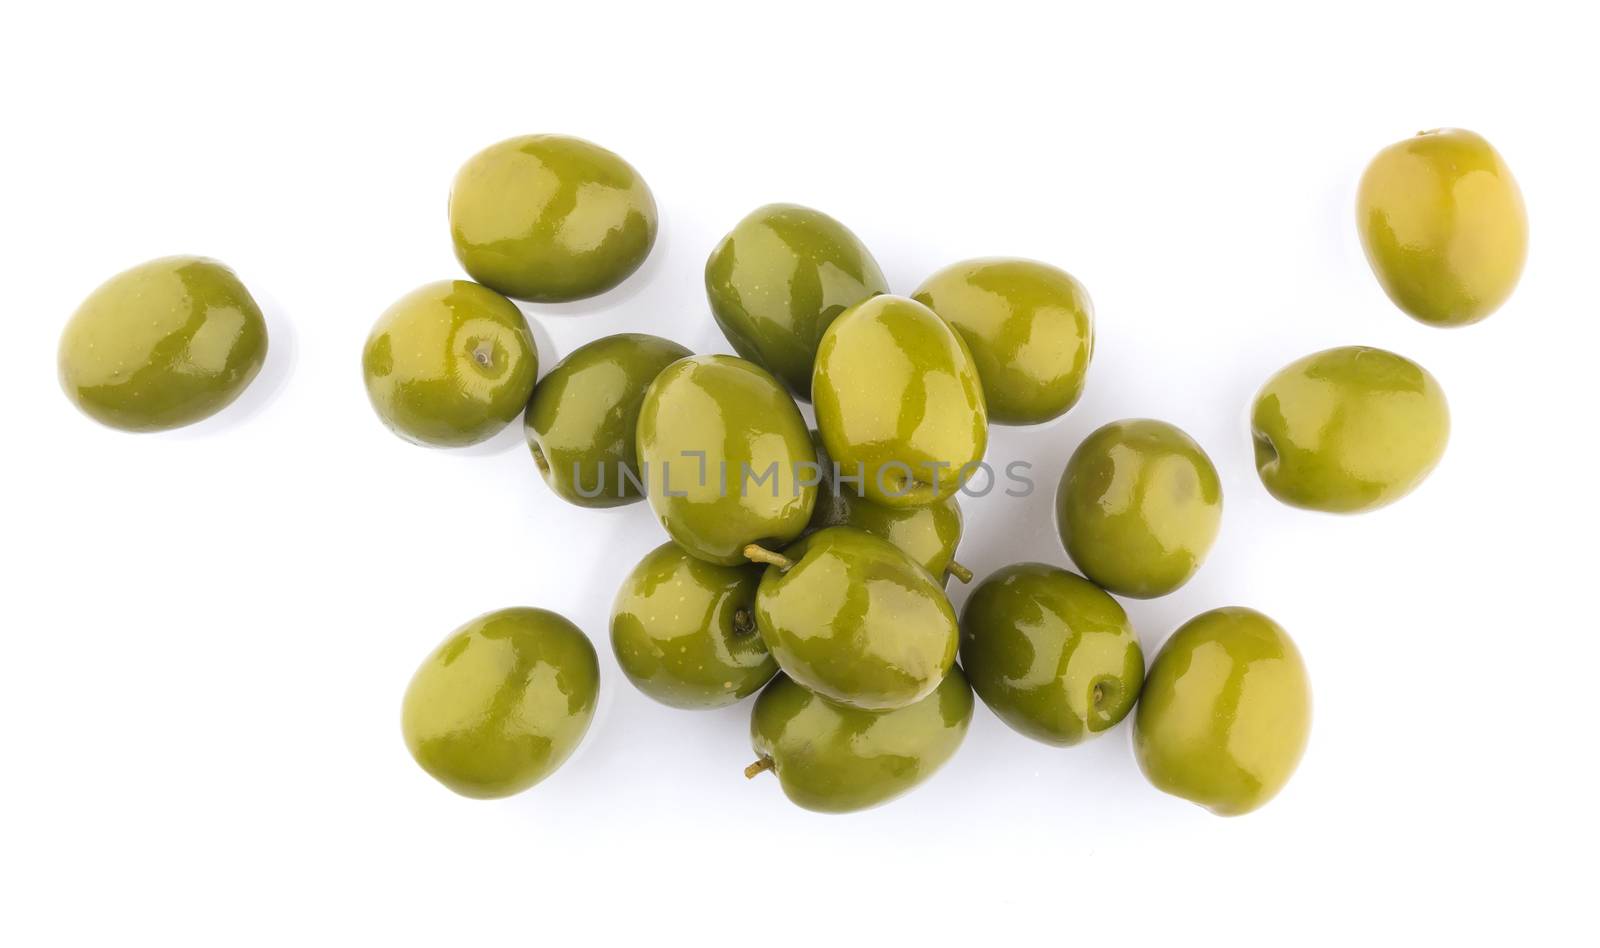 Heap of green olives isolated on white background. Top view by xamtiw